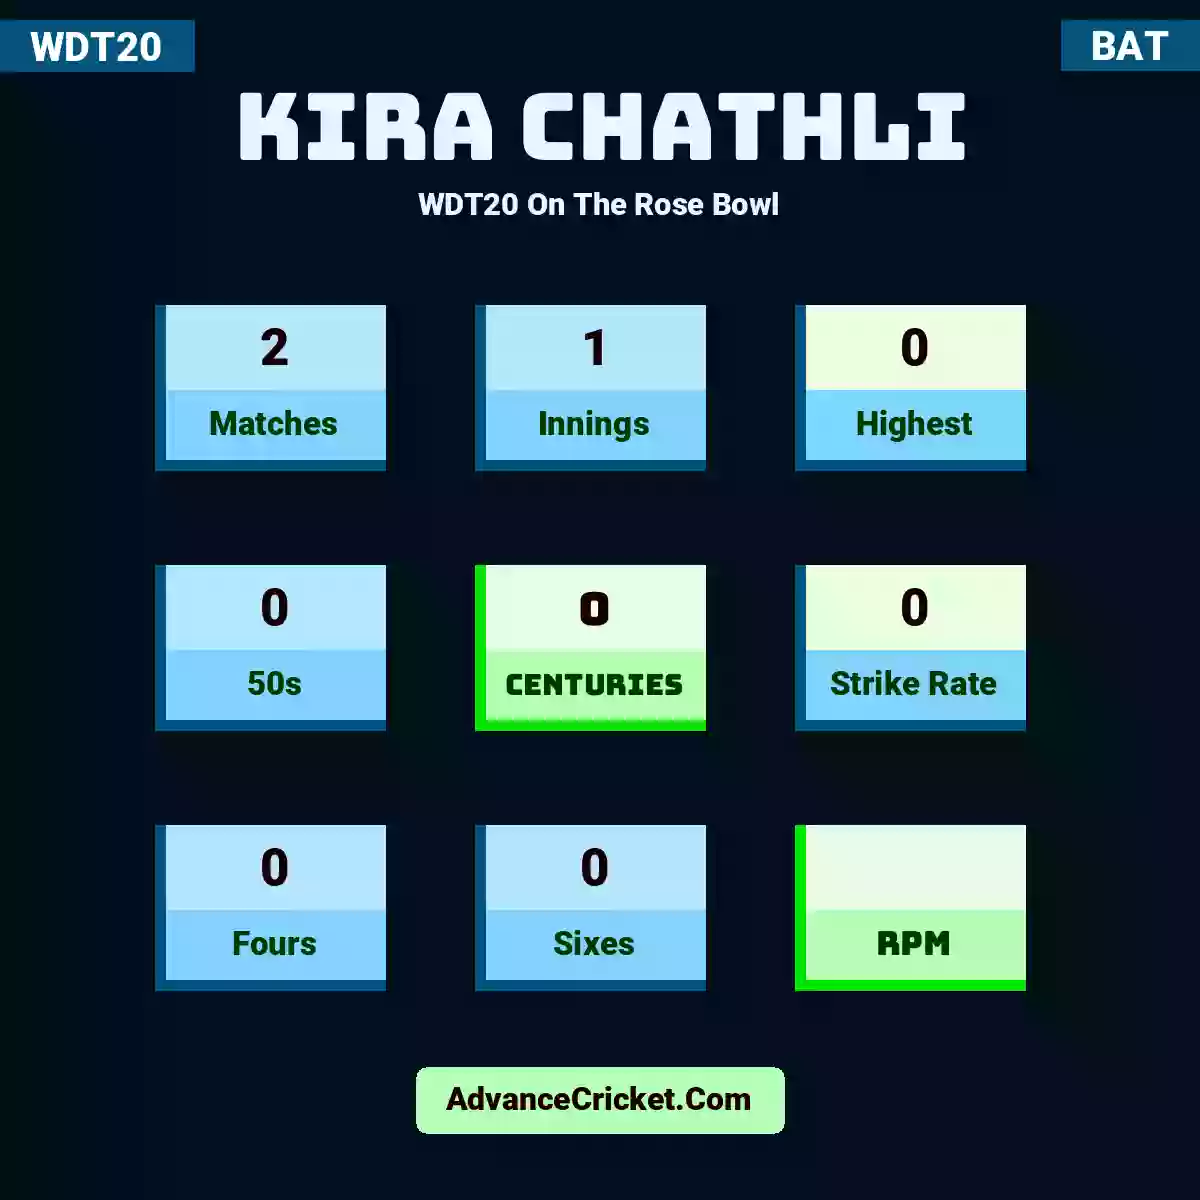 Kira Chathli WDT20  On The Rose Bowl, Kira Chathli played 2 matches, scored 0 runs as highest, 0 half-centuries, and 0 centuries, with a strike rate of 0. K.Chathli hit 0 fours and 0 sixes.